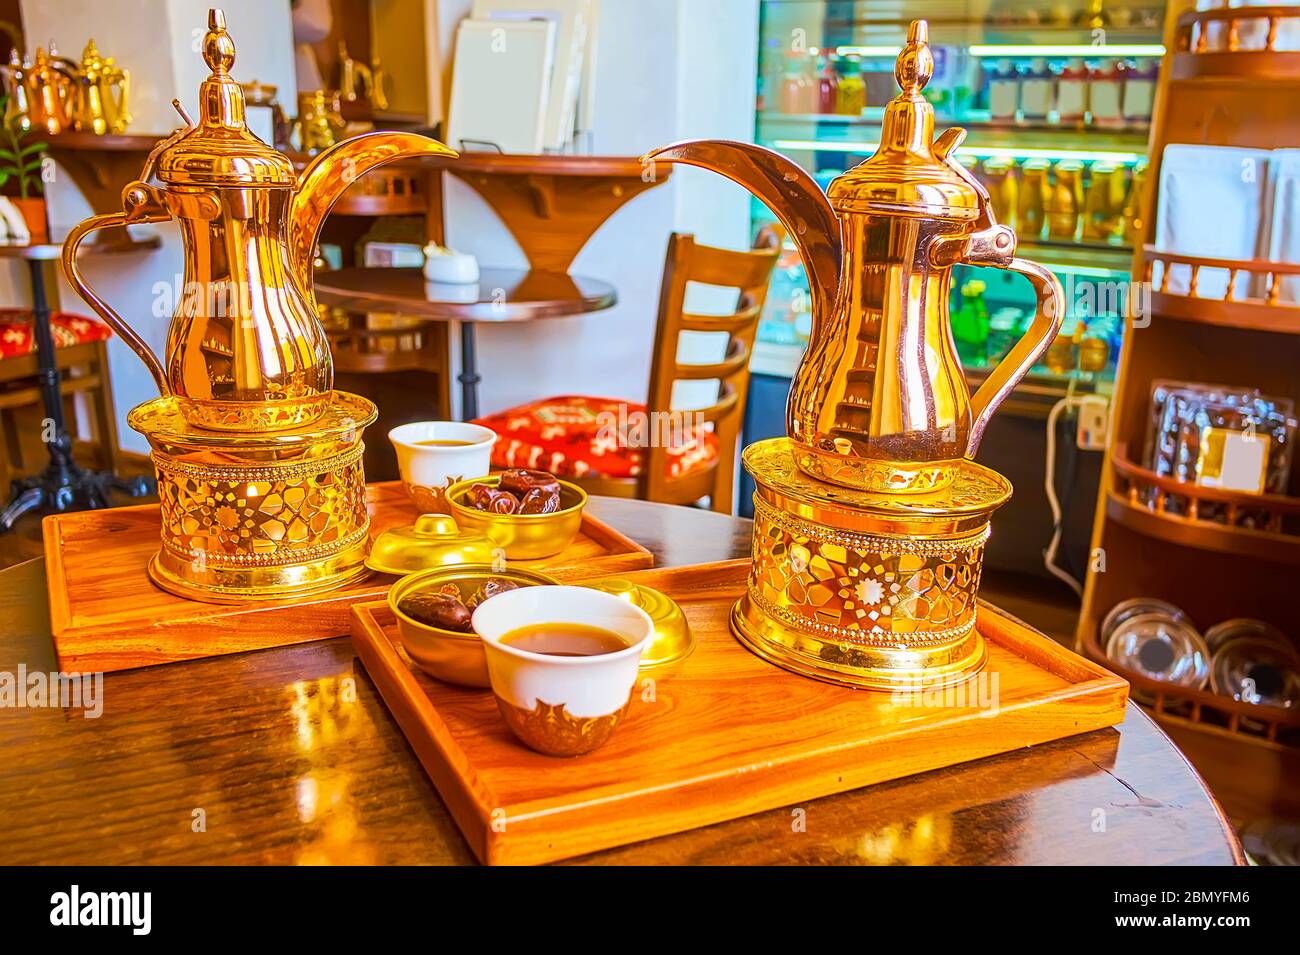 Enjoy delicious arabic qahwa coffee, made in brass dallah coffee pot with herbs and spices, Dubai, UAE Stock Photo